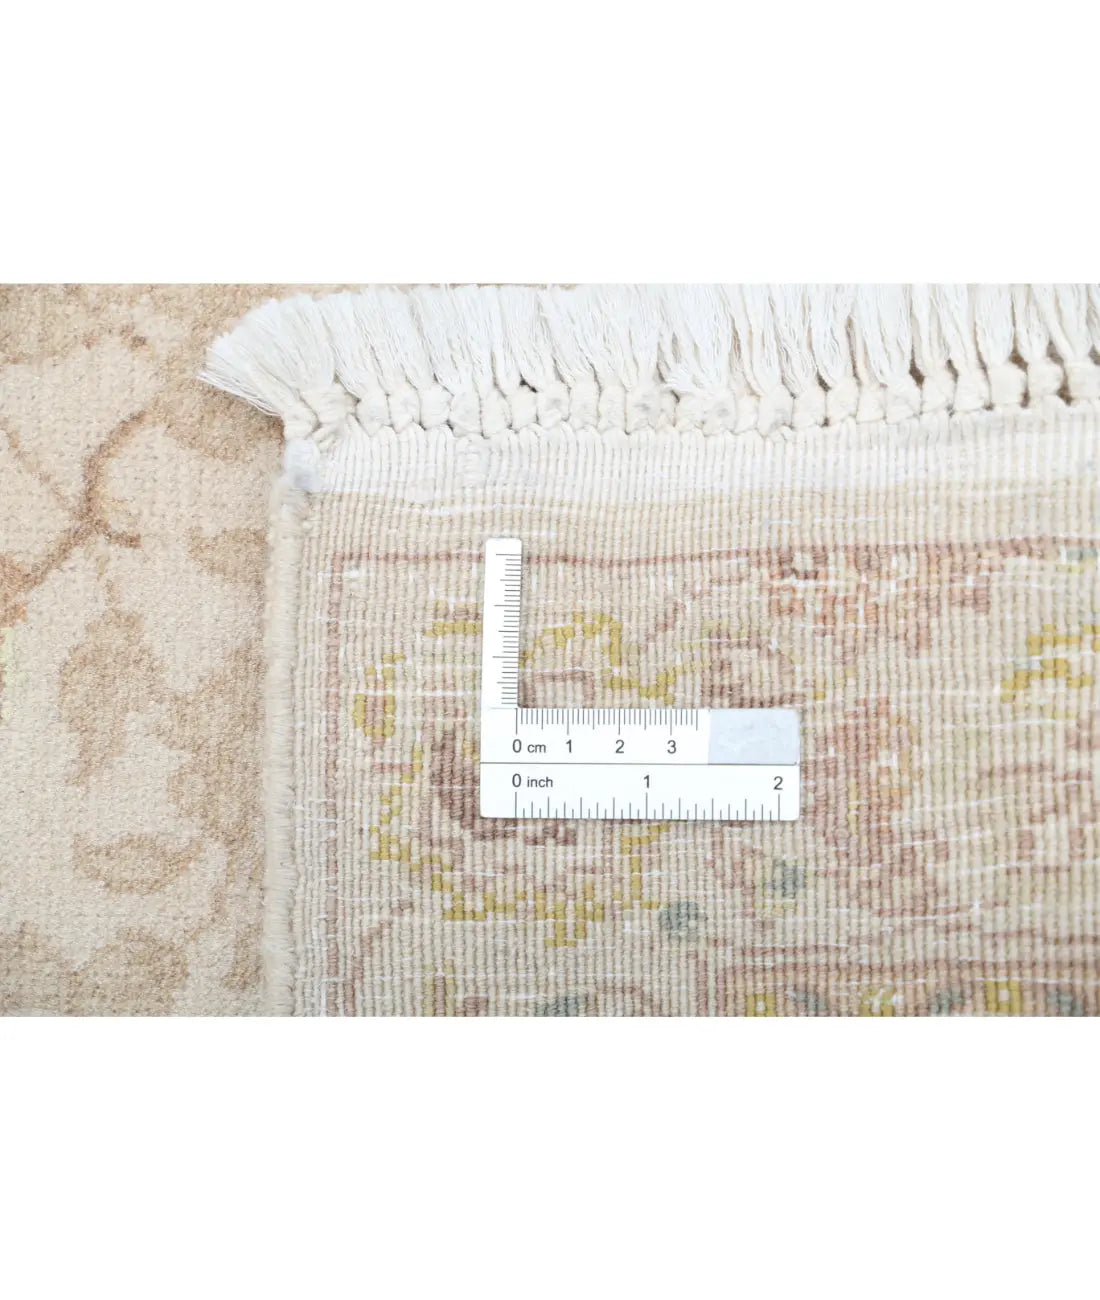 Hand Knotted Agra Kashan Wool Rug - 2'0'' x 4'1''